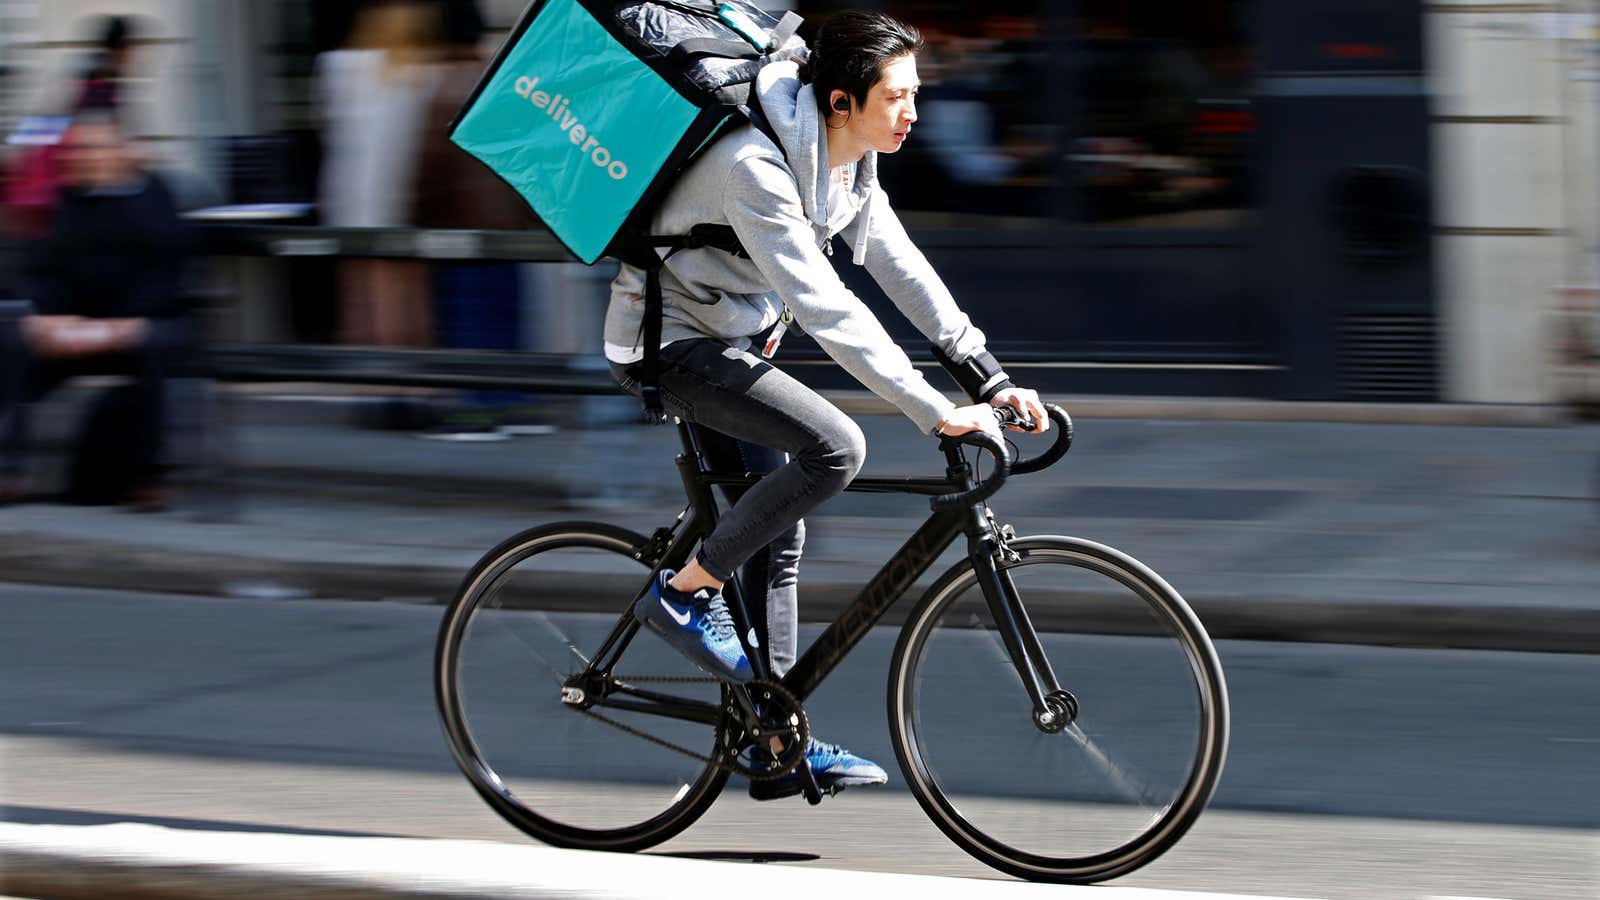 Gig economy workers like those that deliver for Deliveroo typically have fewer social protections than typical workers.